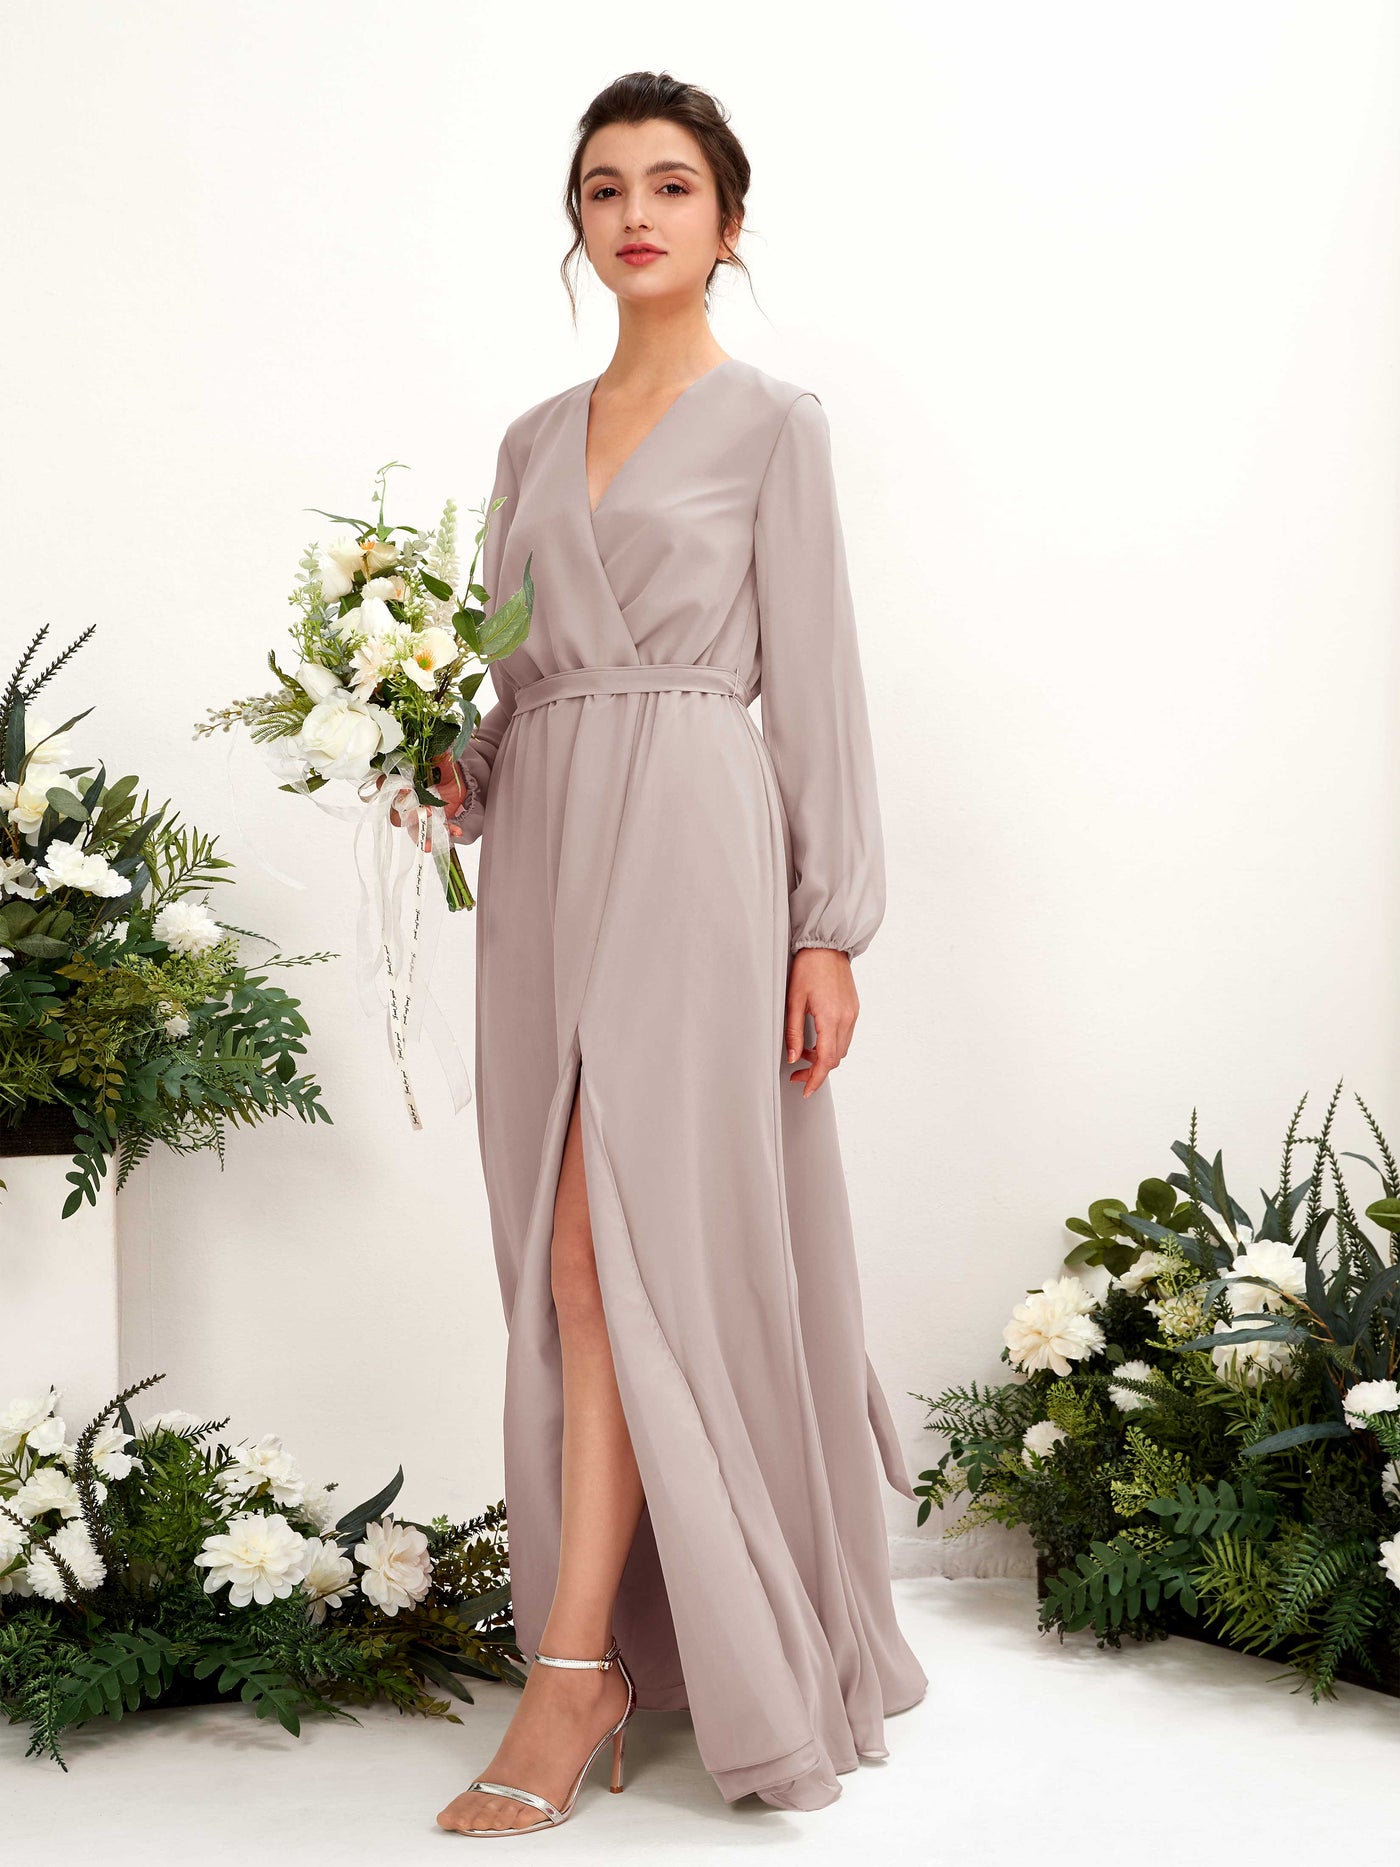 Taupe Bridesmaid Dresses Bridesmaid Dress A-line Chiffon V-neck Full Length Long Sleeves Wedding Party Dress (81223224)#color_taupe